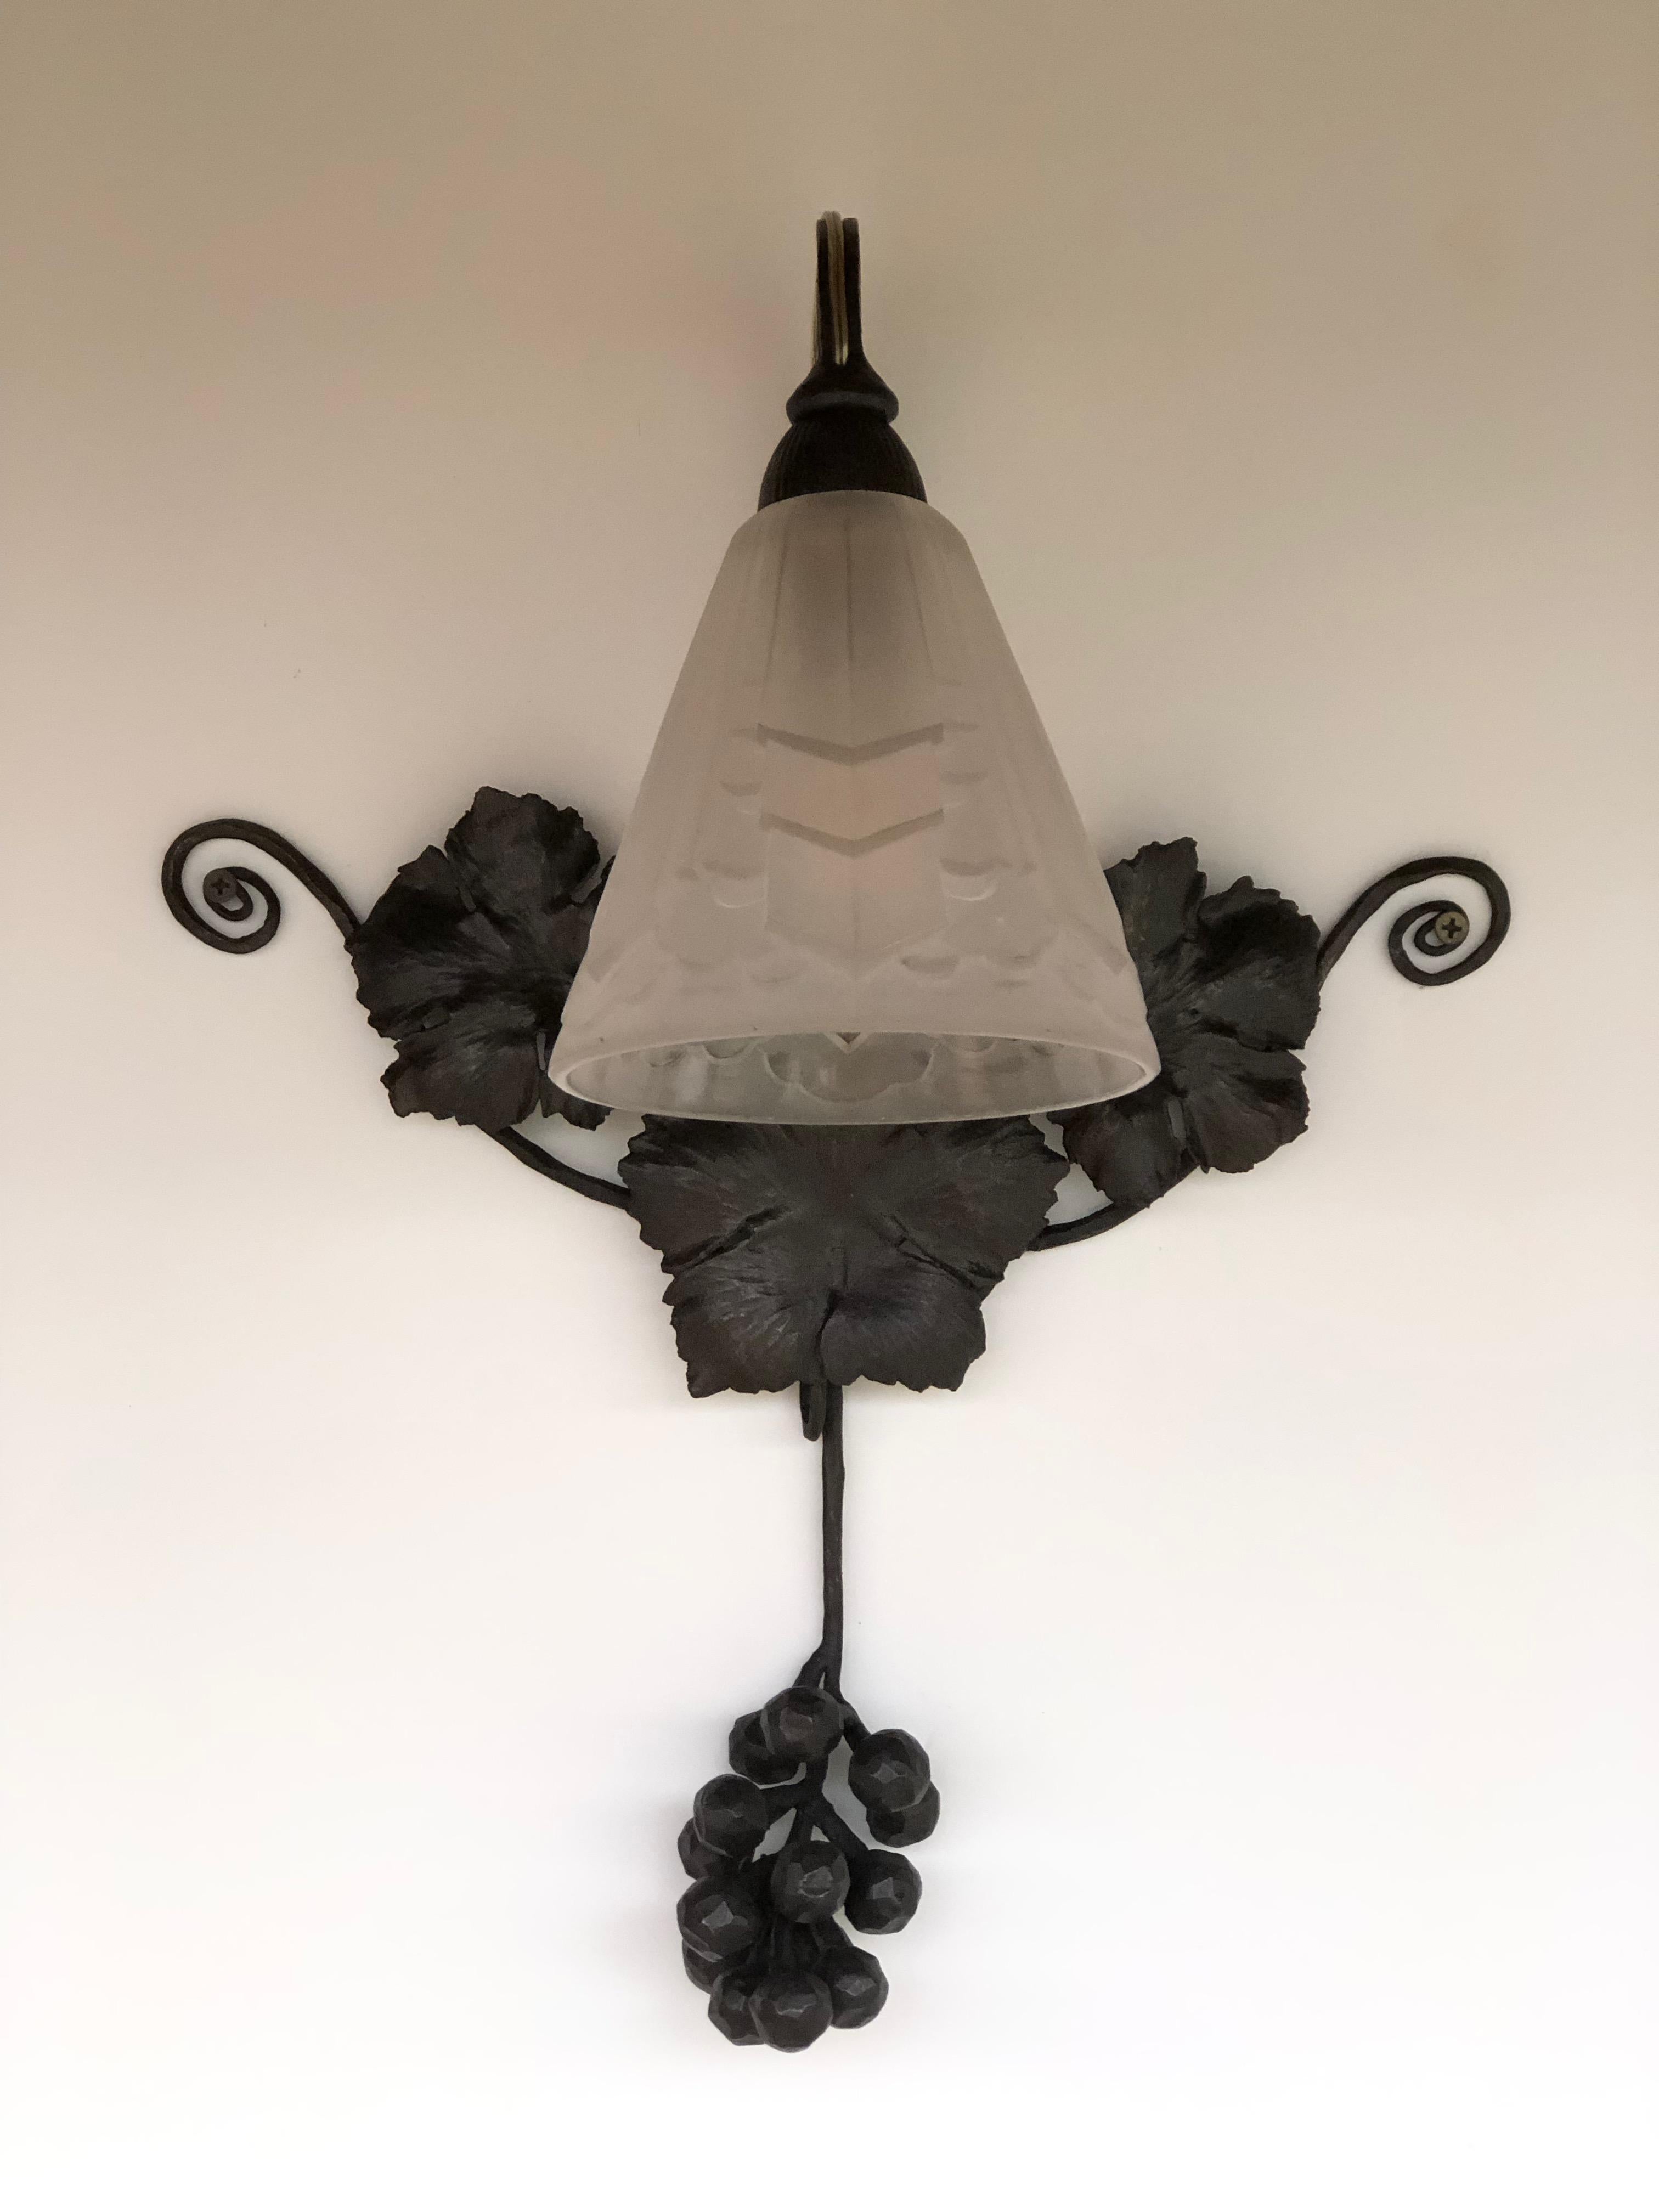 Art deco wall lamp around 1930, in the style of Degue.
Wrought iron frame decorated with vine leaves and bunches of grapes. 
Molded glass tulip with geometric decoration.
Wall lamp in perfect condition and electrified.
For more information do not